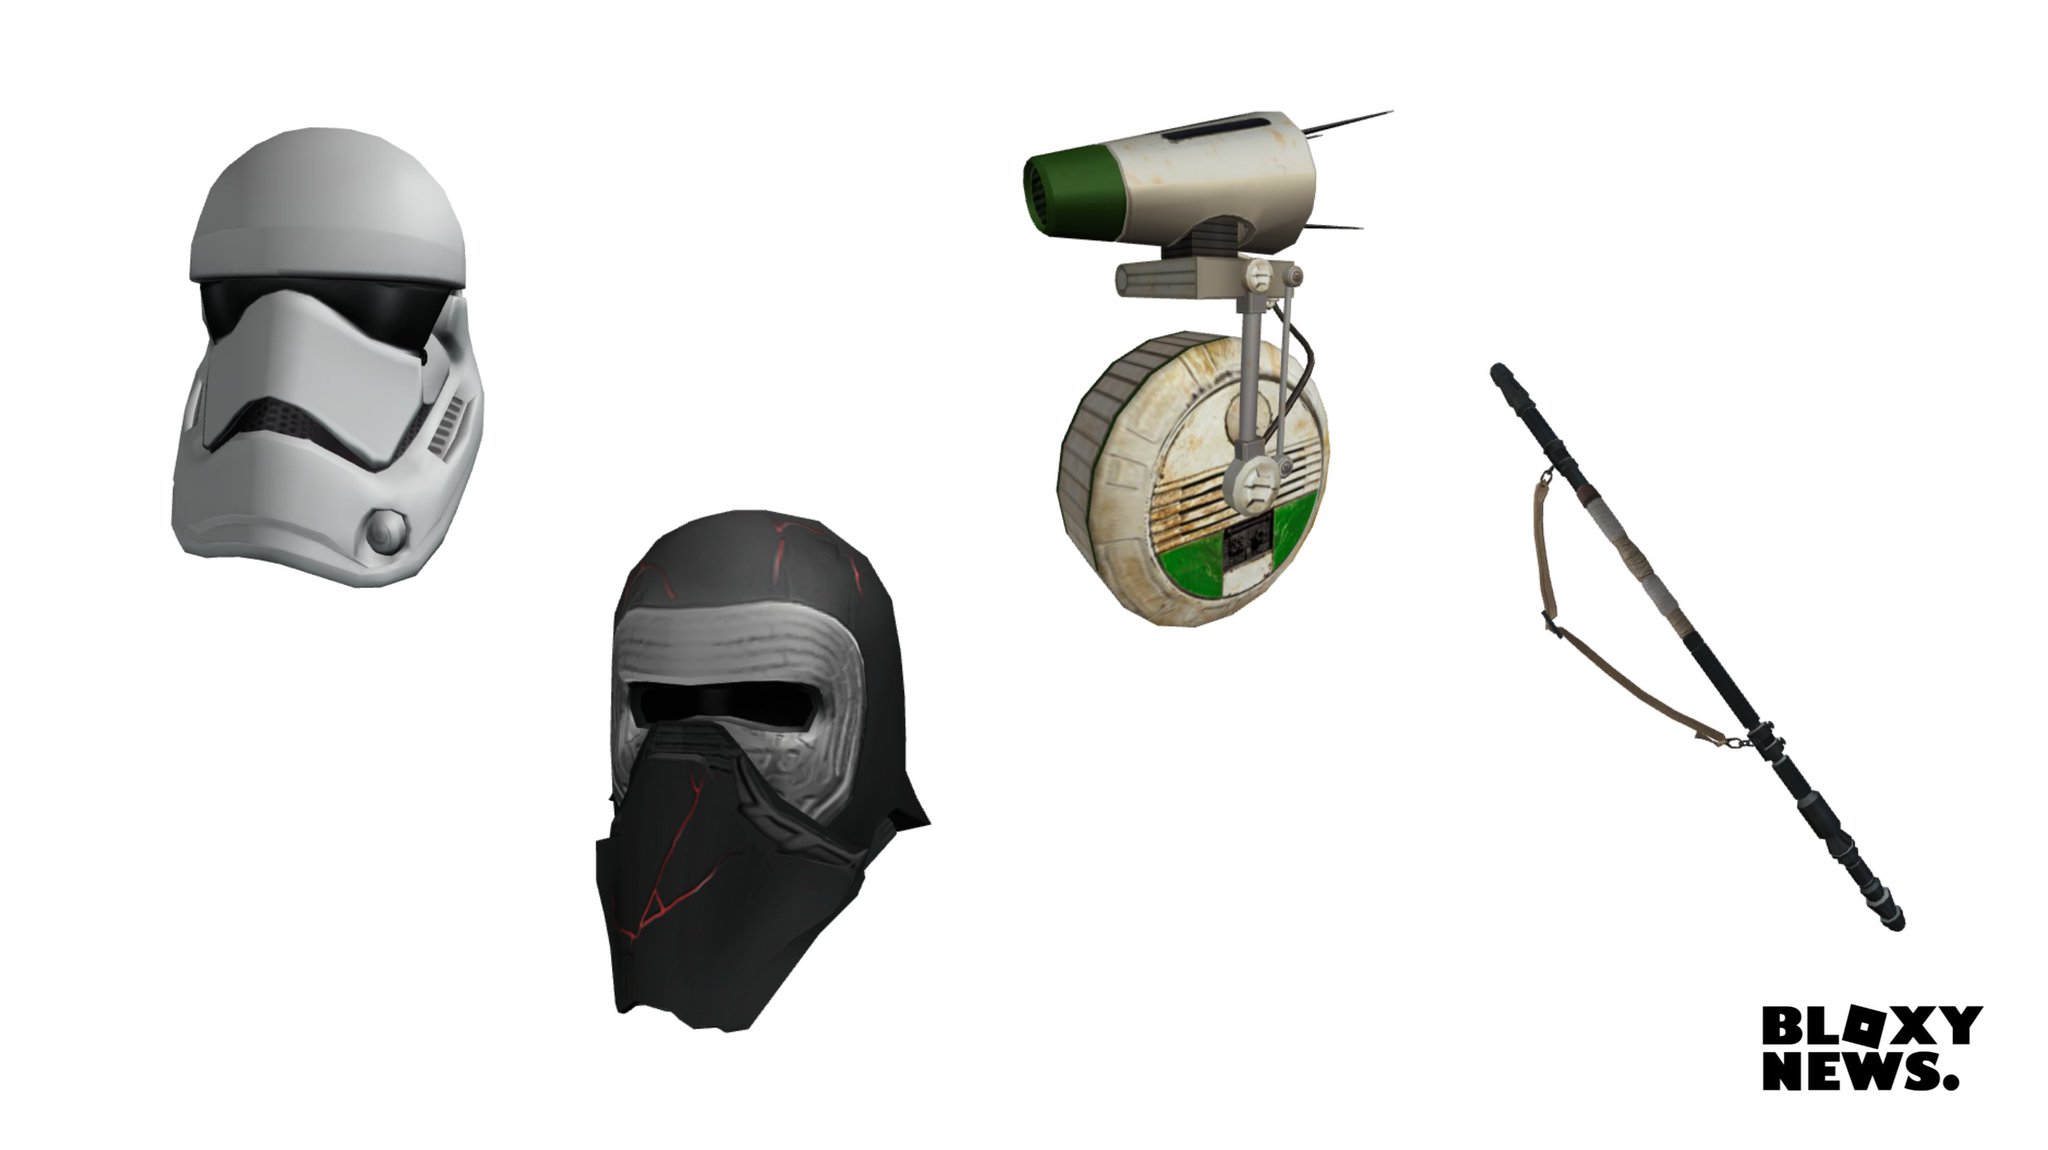 Bloxy News On Twitter Some Starwars Items Have Been Leaked On Roblox These May Either Be Separate Hats Gear Or Parts Of Bundles Storm Trooper Helmet Https T Co Xwax8kh504 Kylo Ren S Helmet Https T Co 8taejy9h8m - rbxleaks roblox promo codes